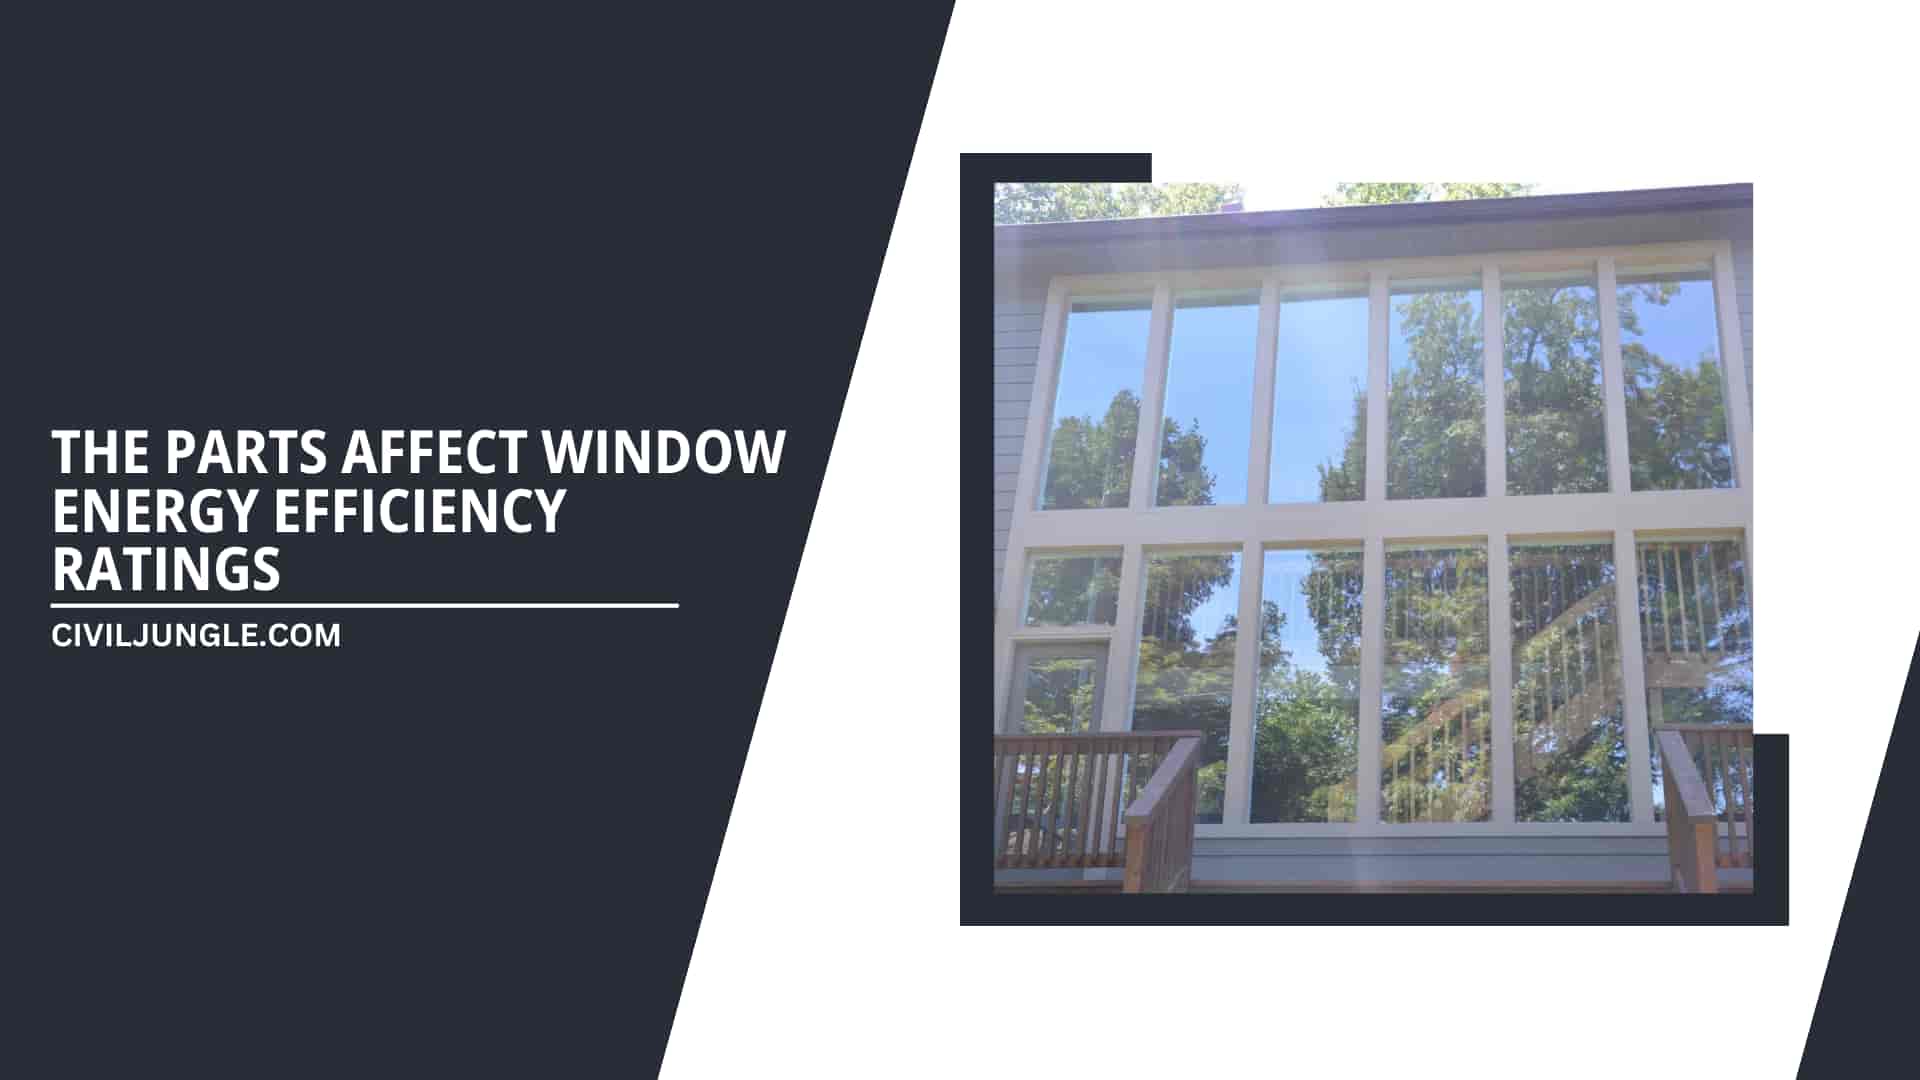 The Parts Affect Window Energy Efficiency Ratings